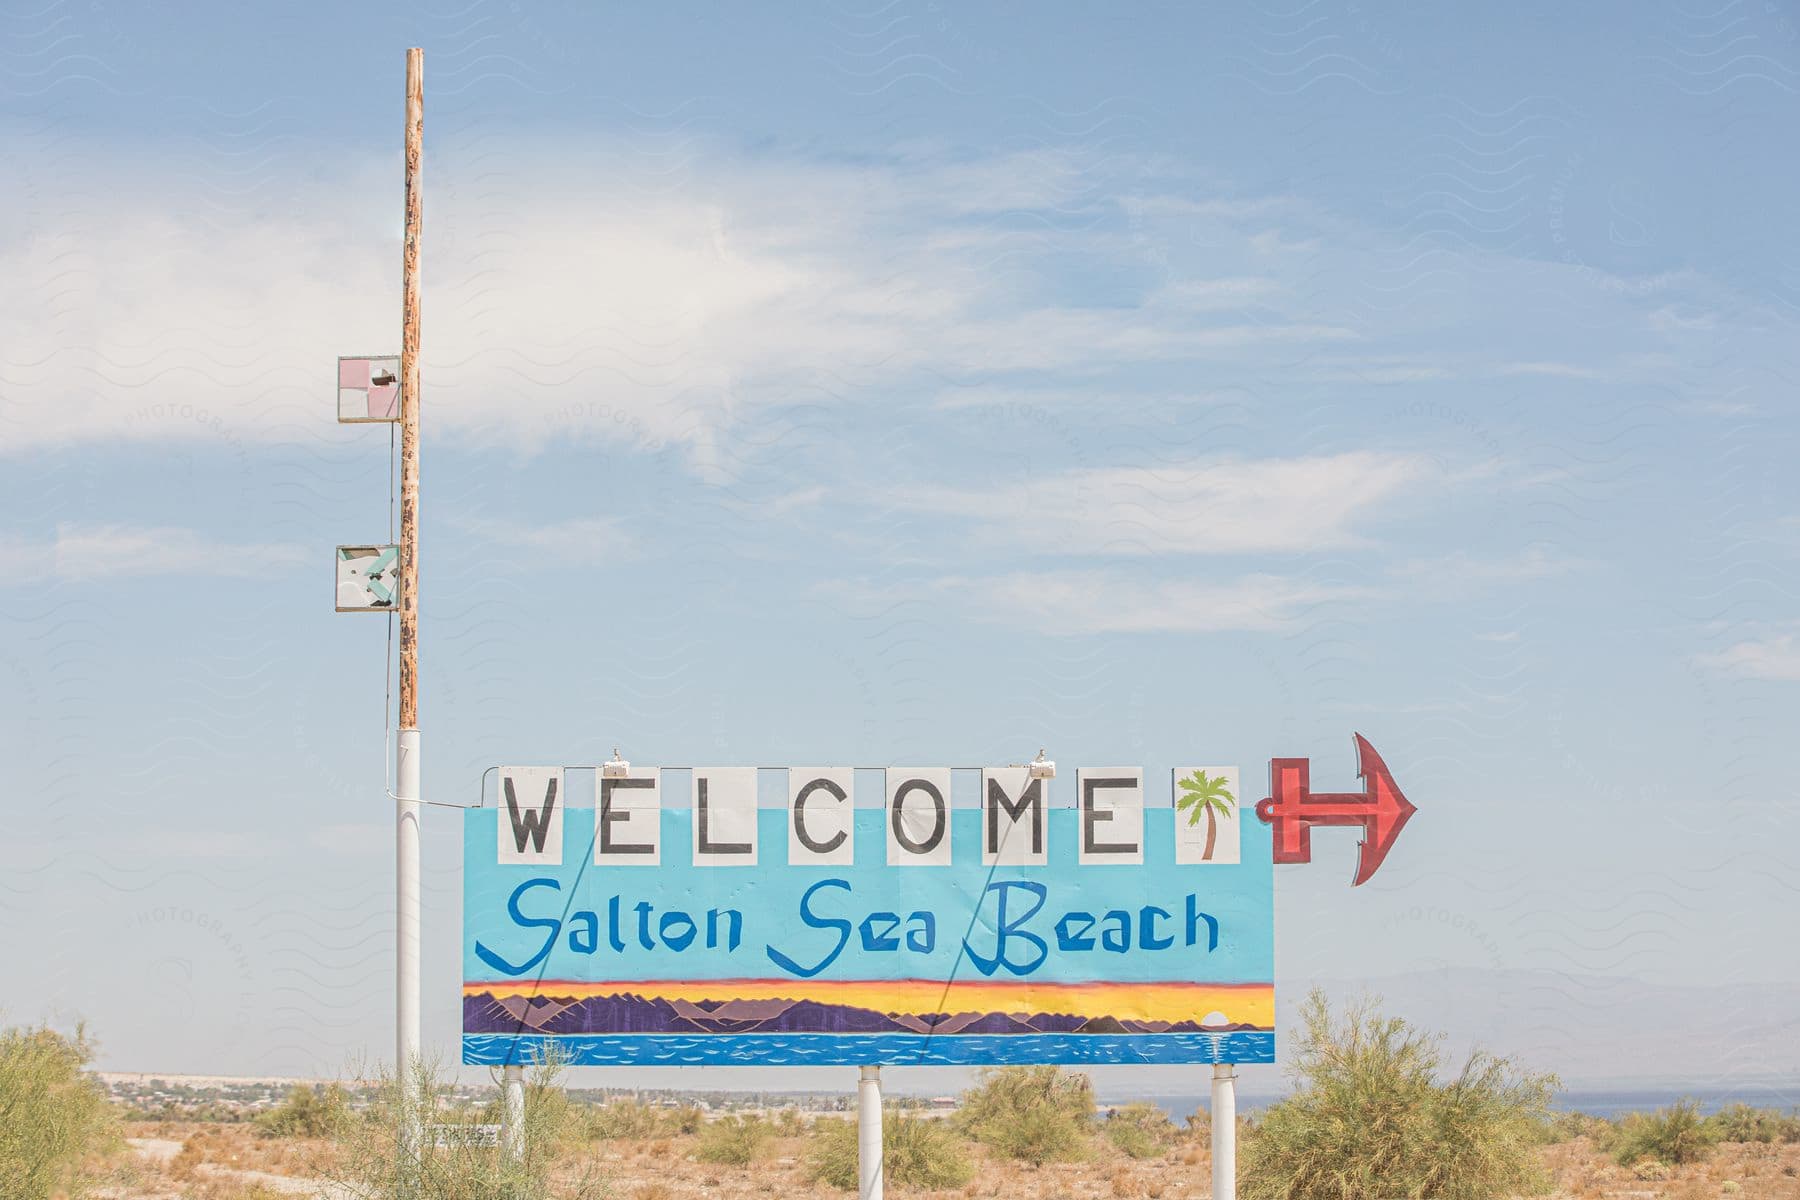 A sign that says welcome to salton sea beach in front of a beach